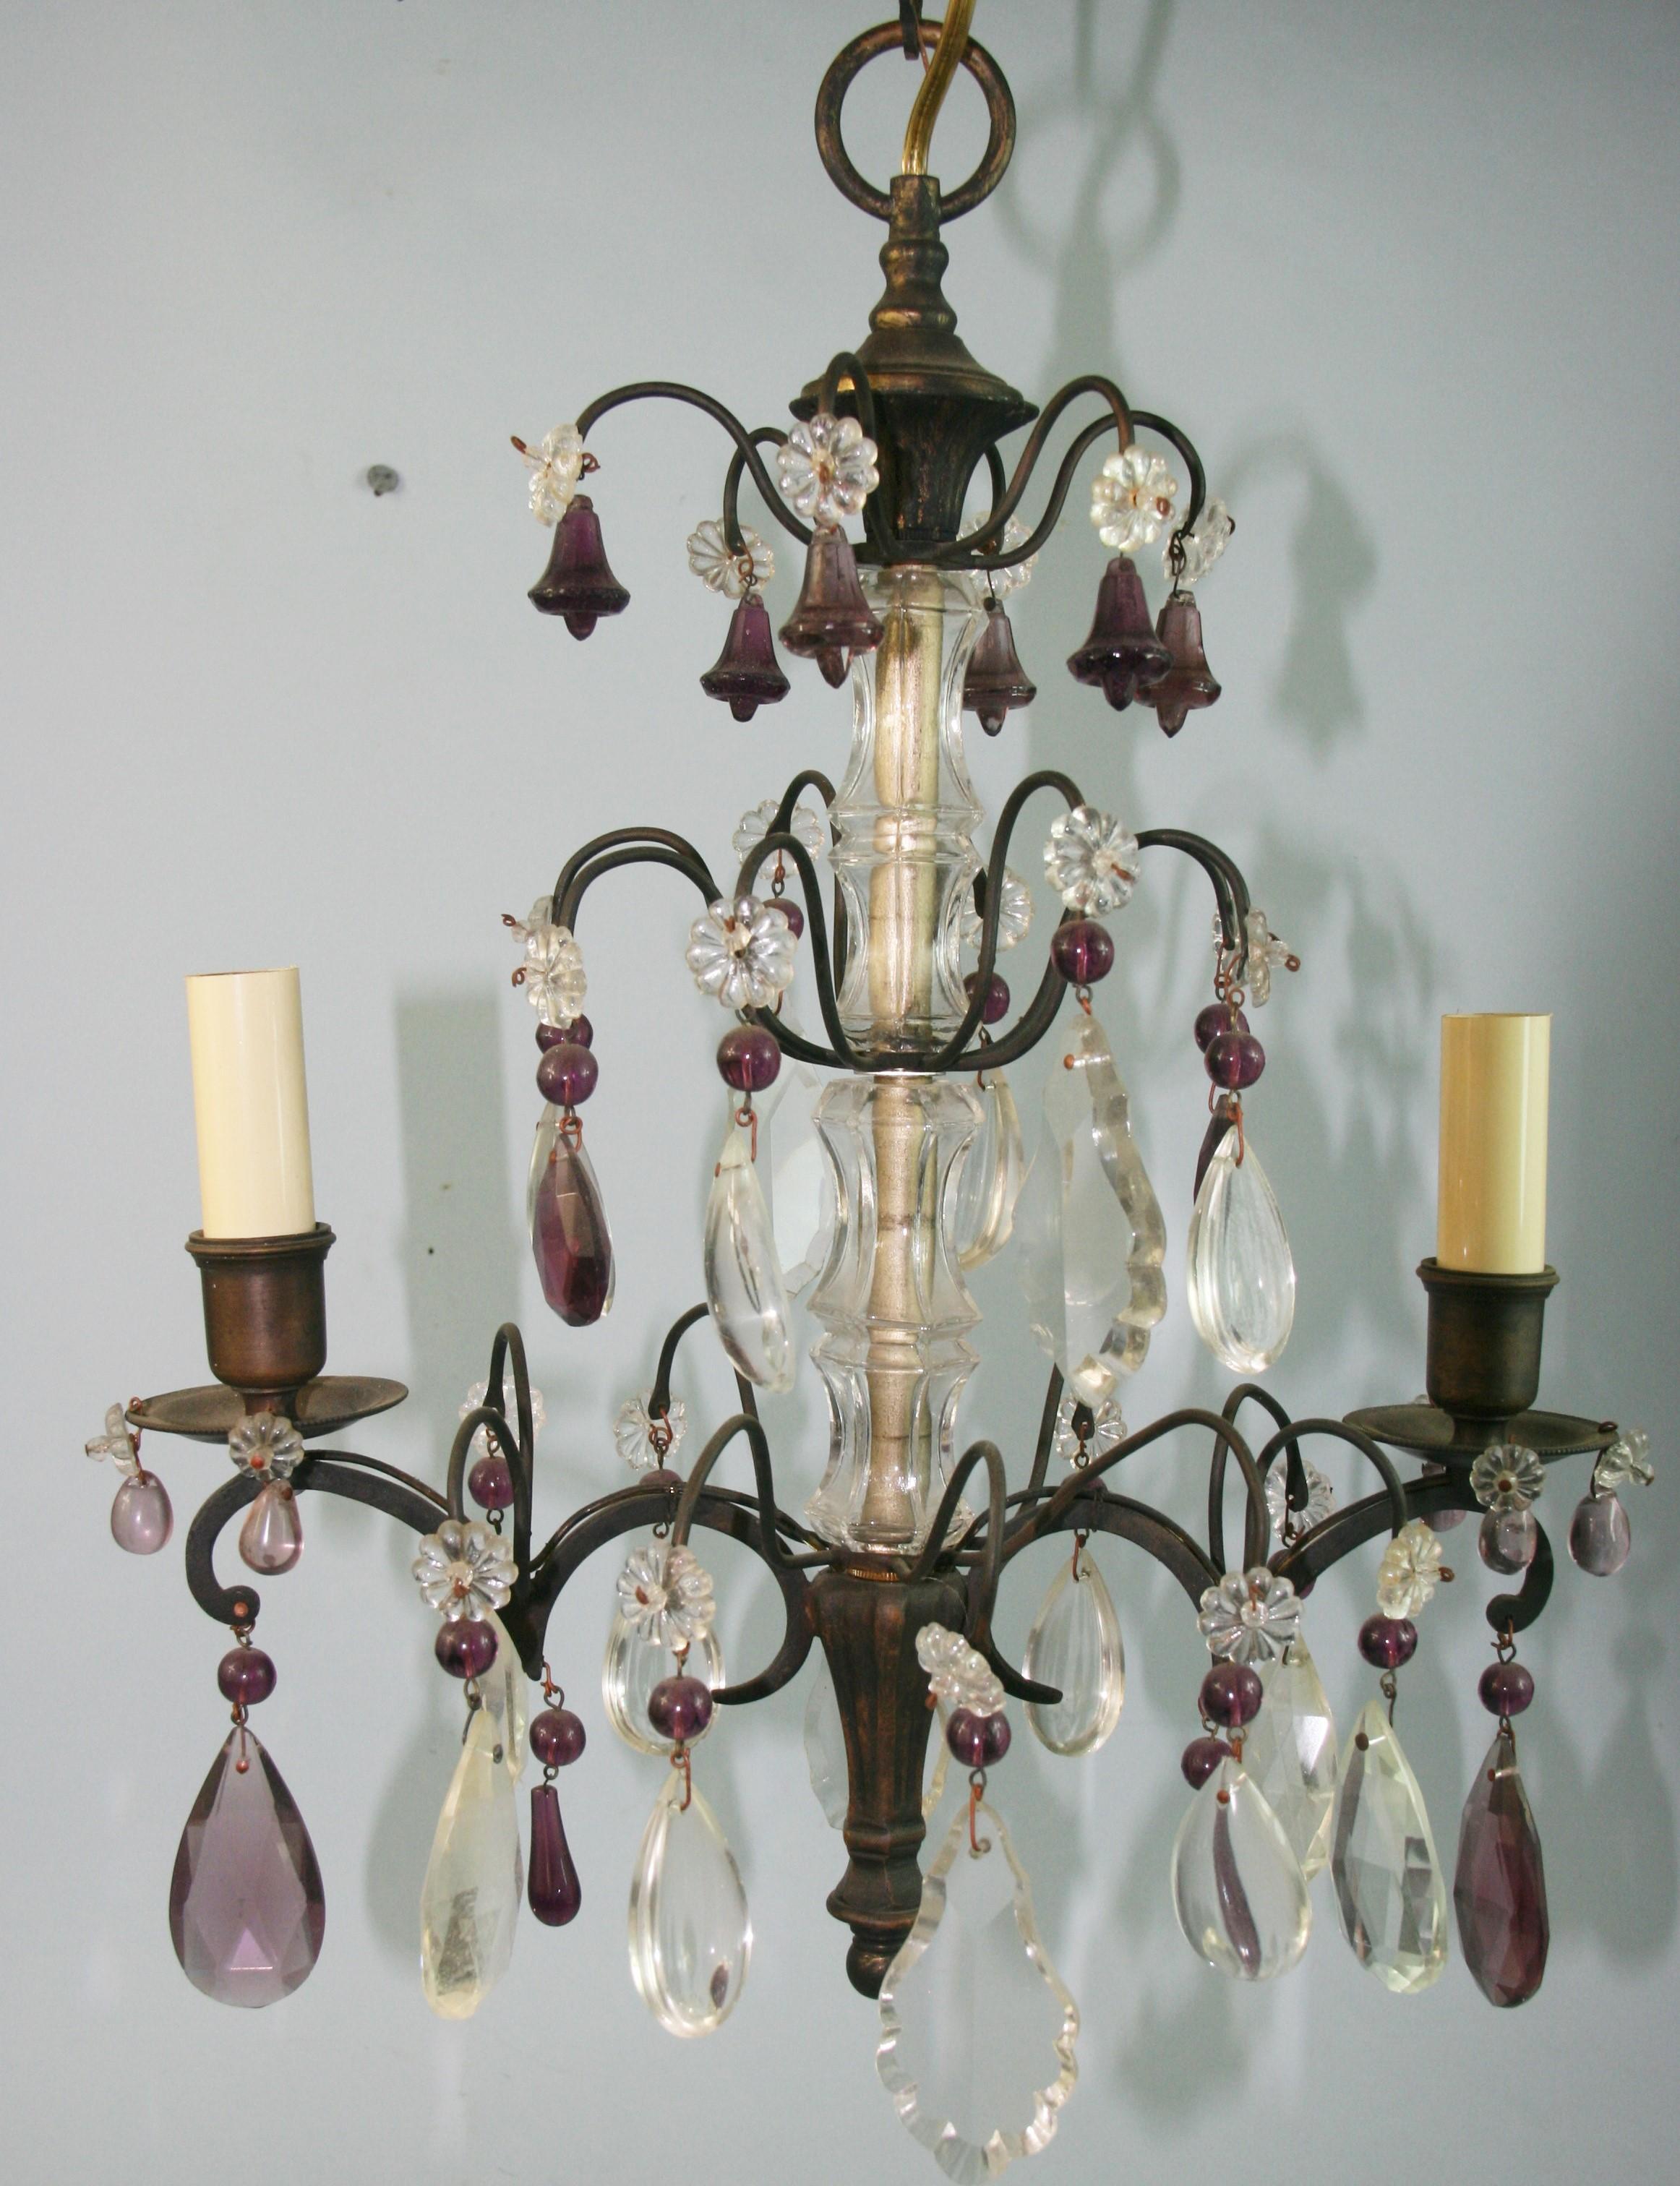 1620  A French two-light chandelier decorated with amethyst bells and clear crystals.
Takes 2 60 watt candelabra based bulbs.
 
 